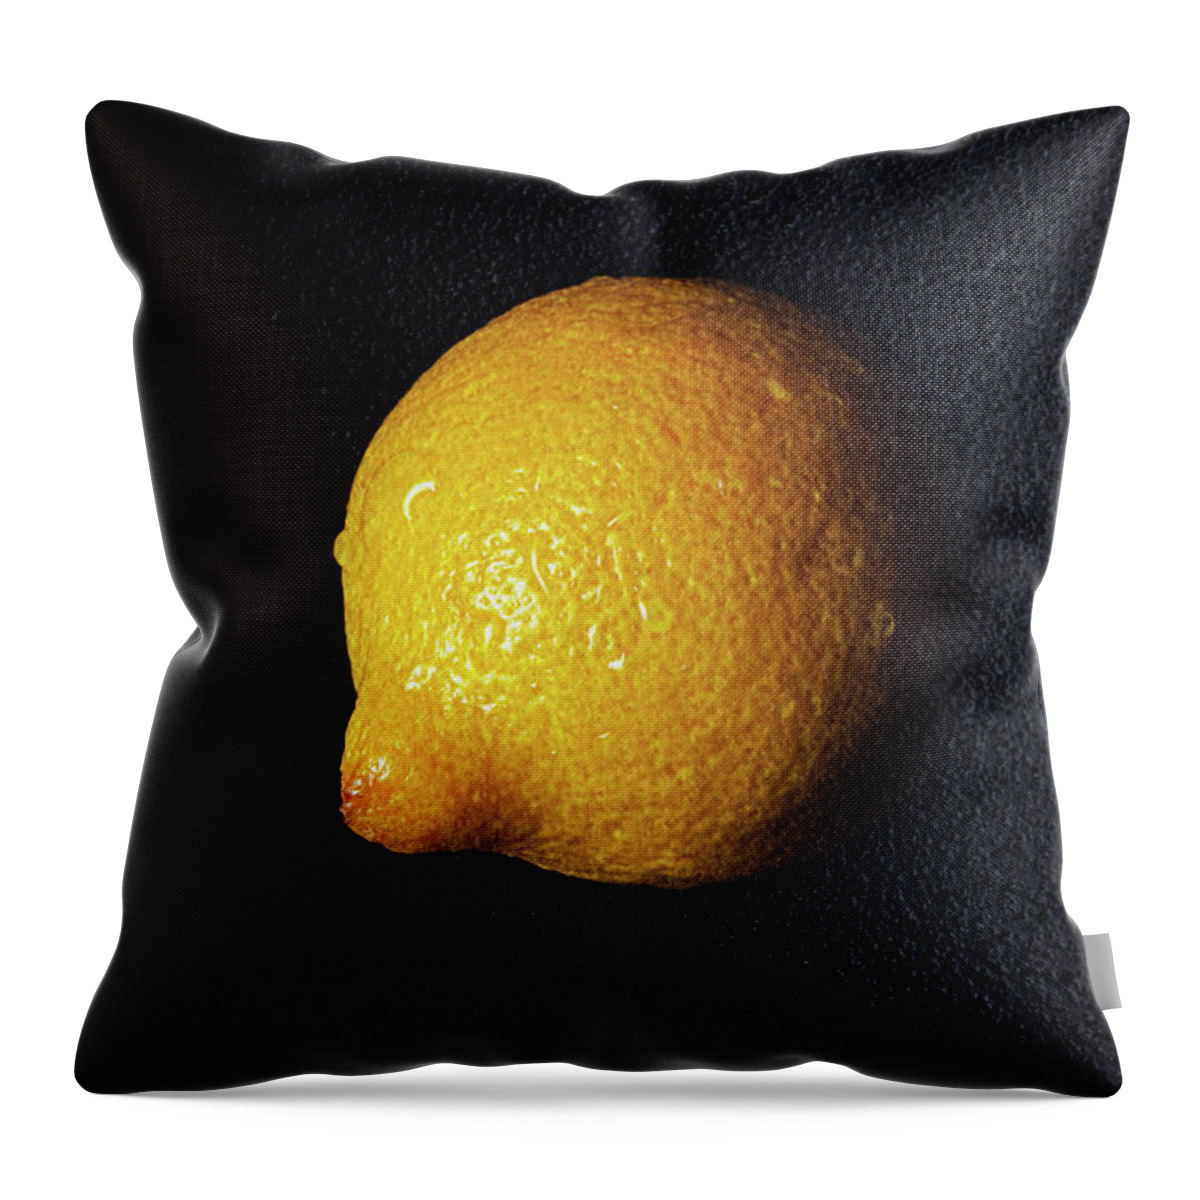 Lemon Throw Pillow featuring the photograph The Lazy Lemon by Andee Design